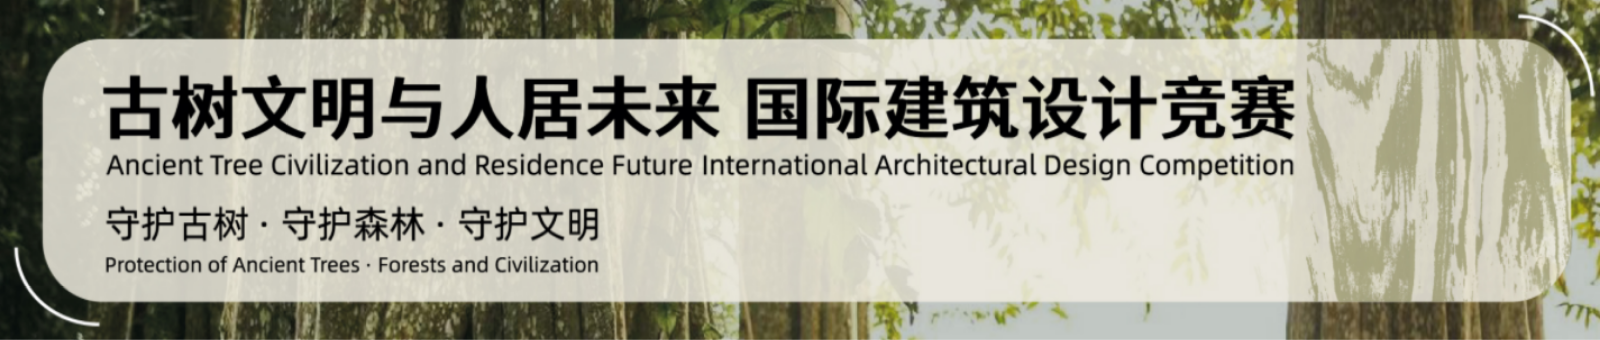 ANCIENT TREE CIVILIZATION AND RESIDENCE FUTURE INTERNATIONAL ARCHITECTURAL DESIGN COMPETITION